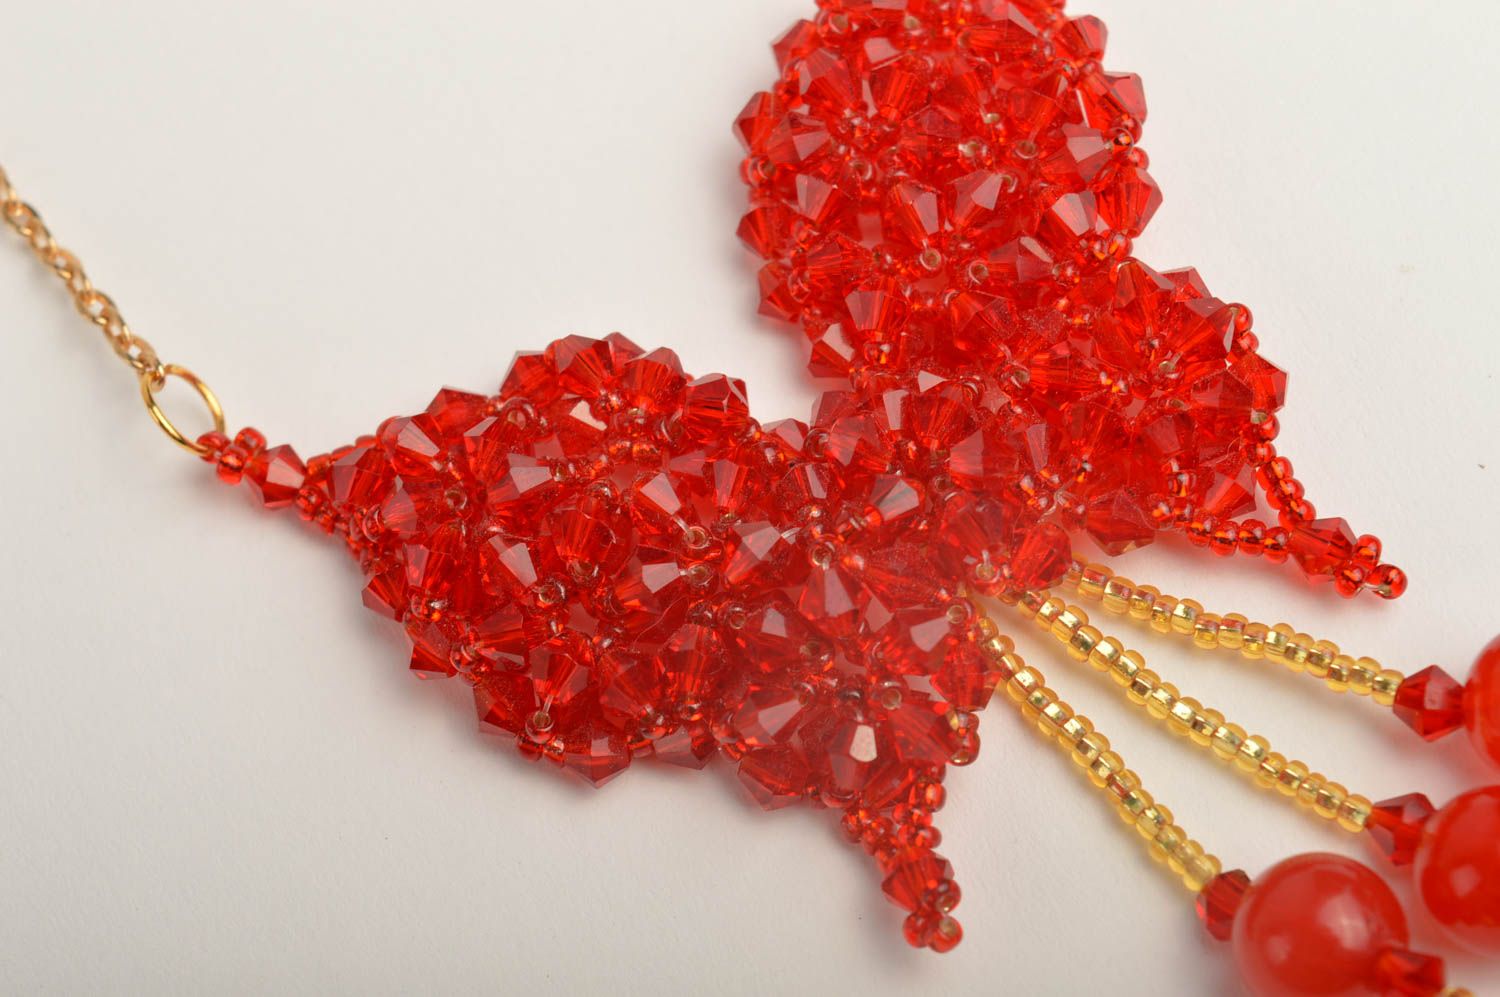 Red handmade beaded pendant necklace fashion accessories necklace design photo 4